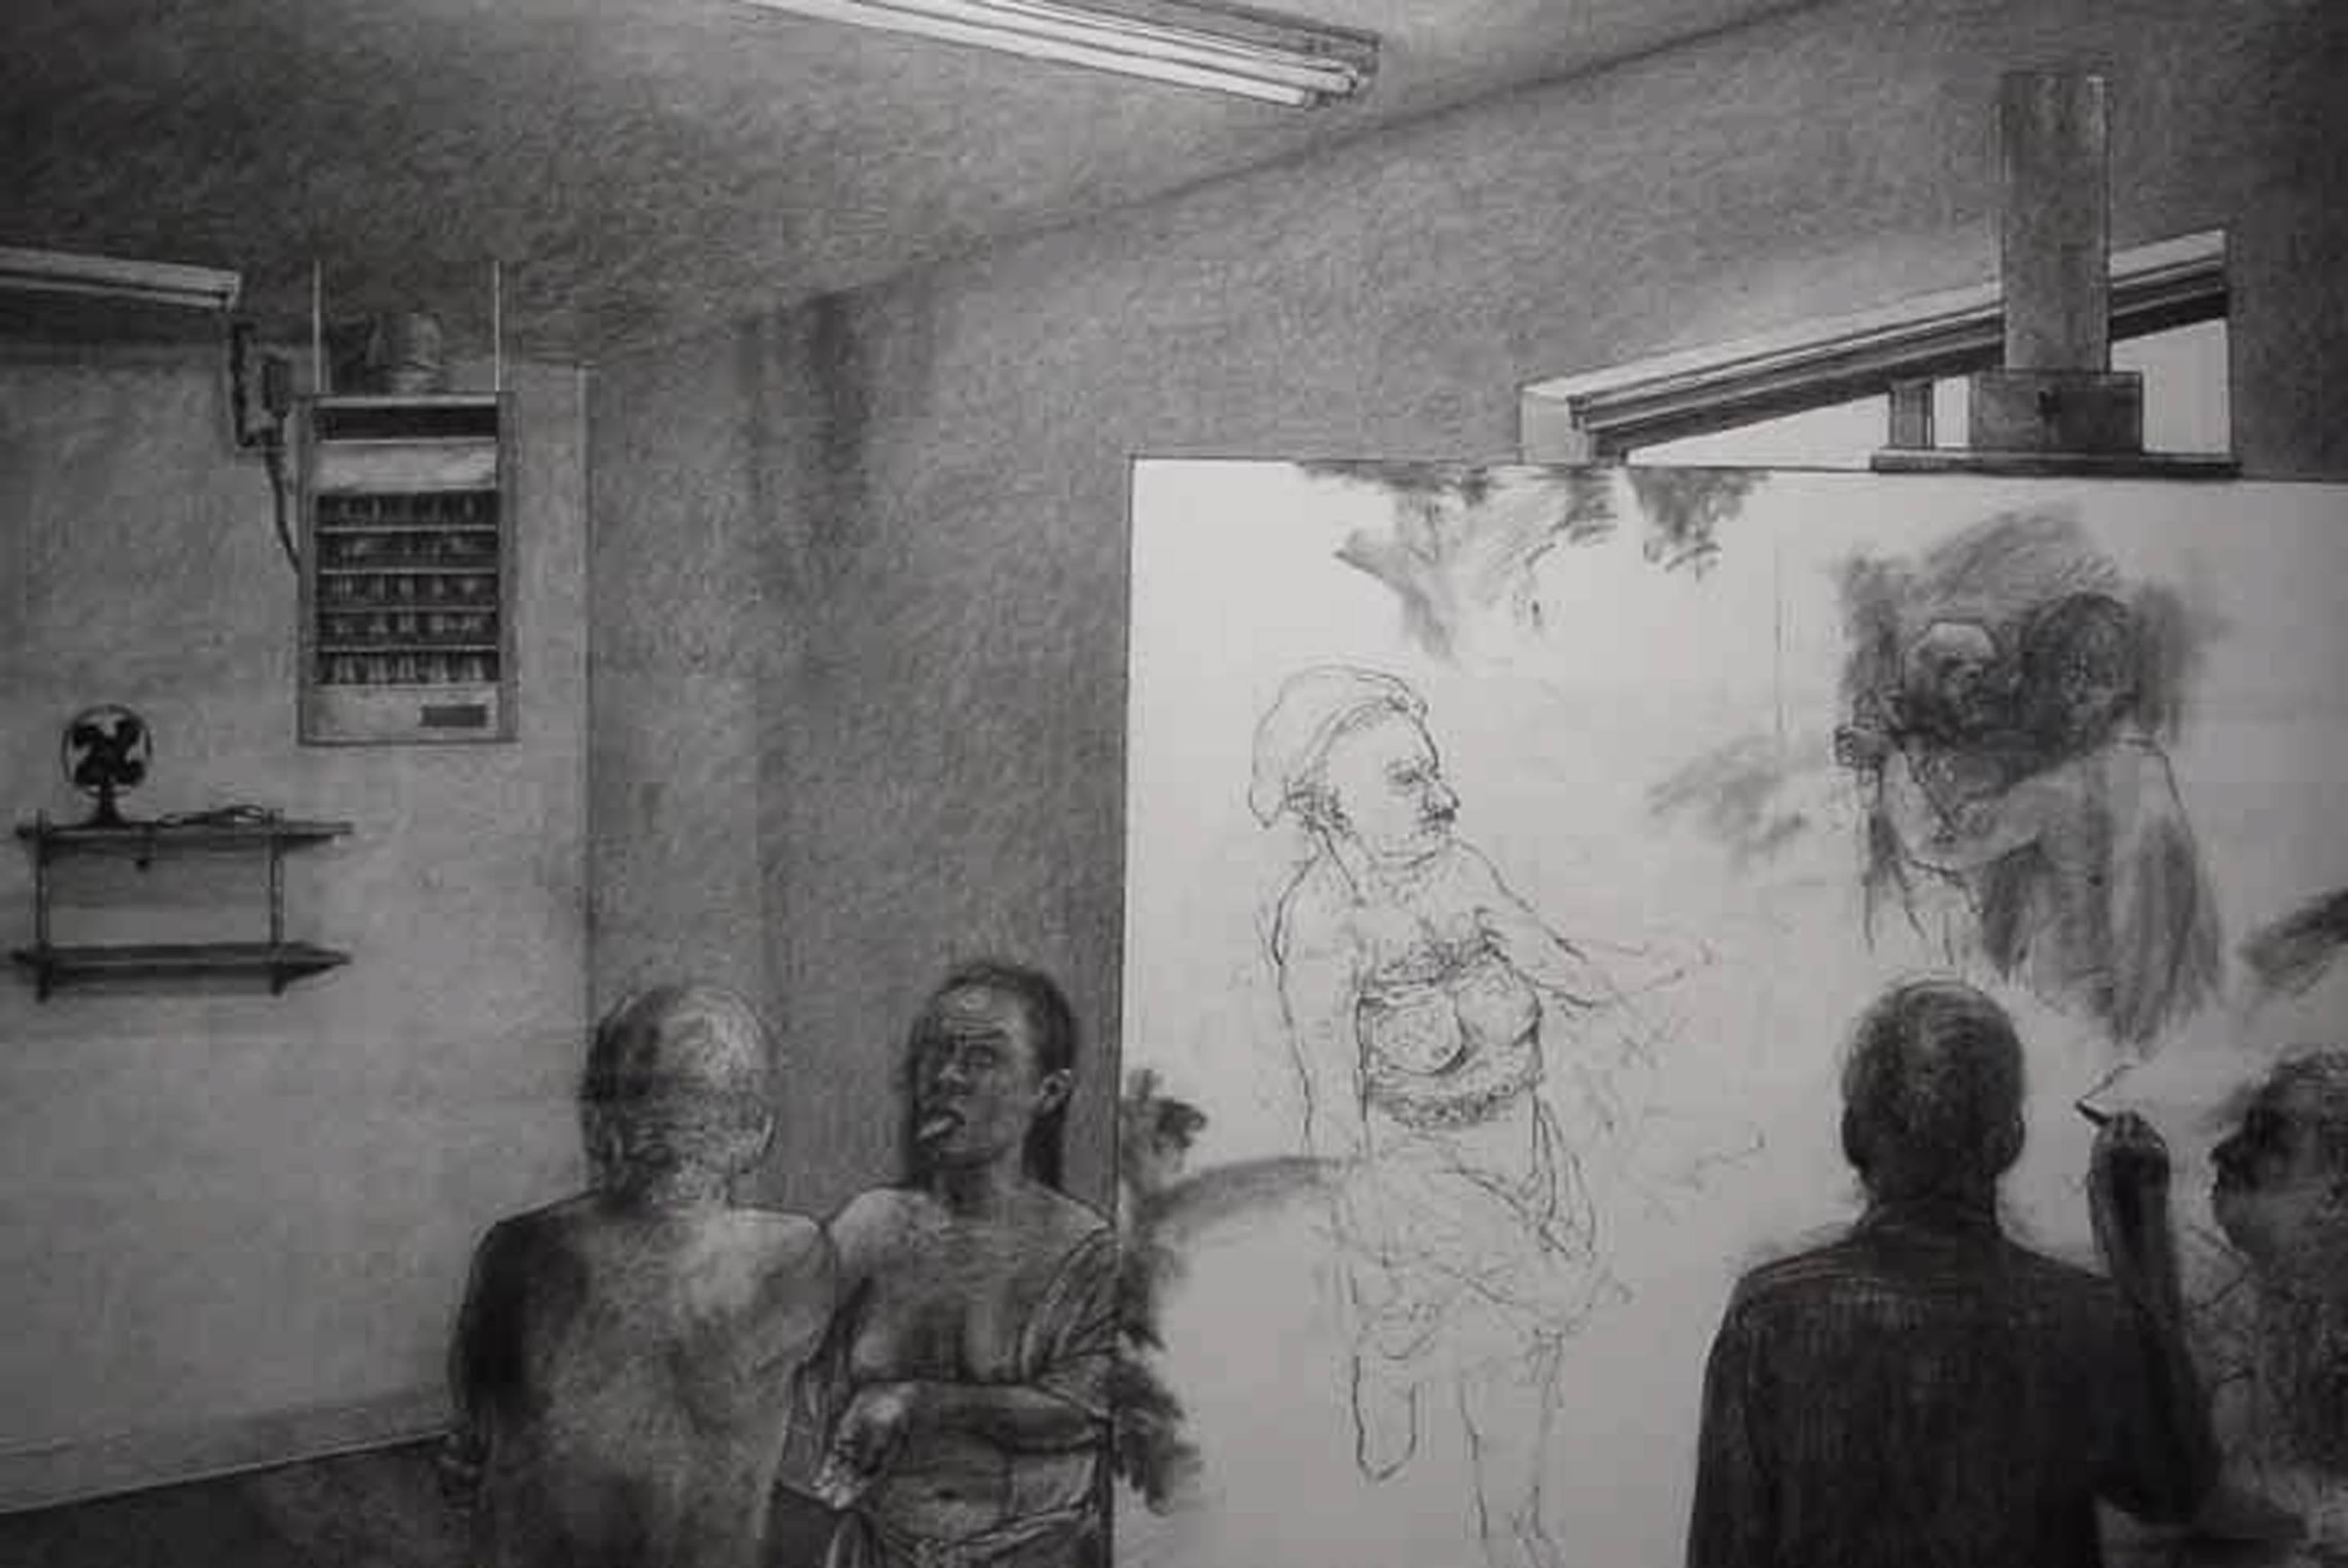 David Becker Figurative Art - Unruly Muse - Allegorical Drawing of the Artist in The Studio with Models